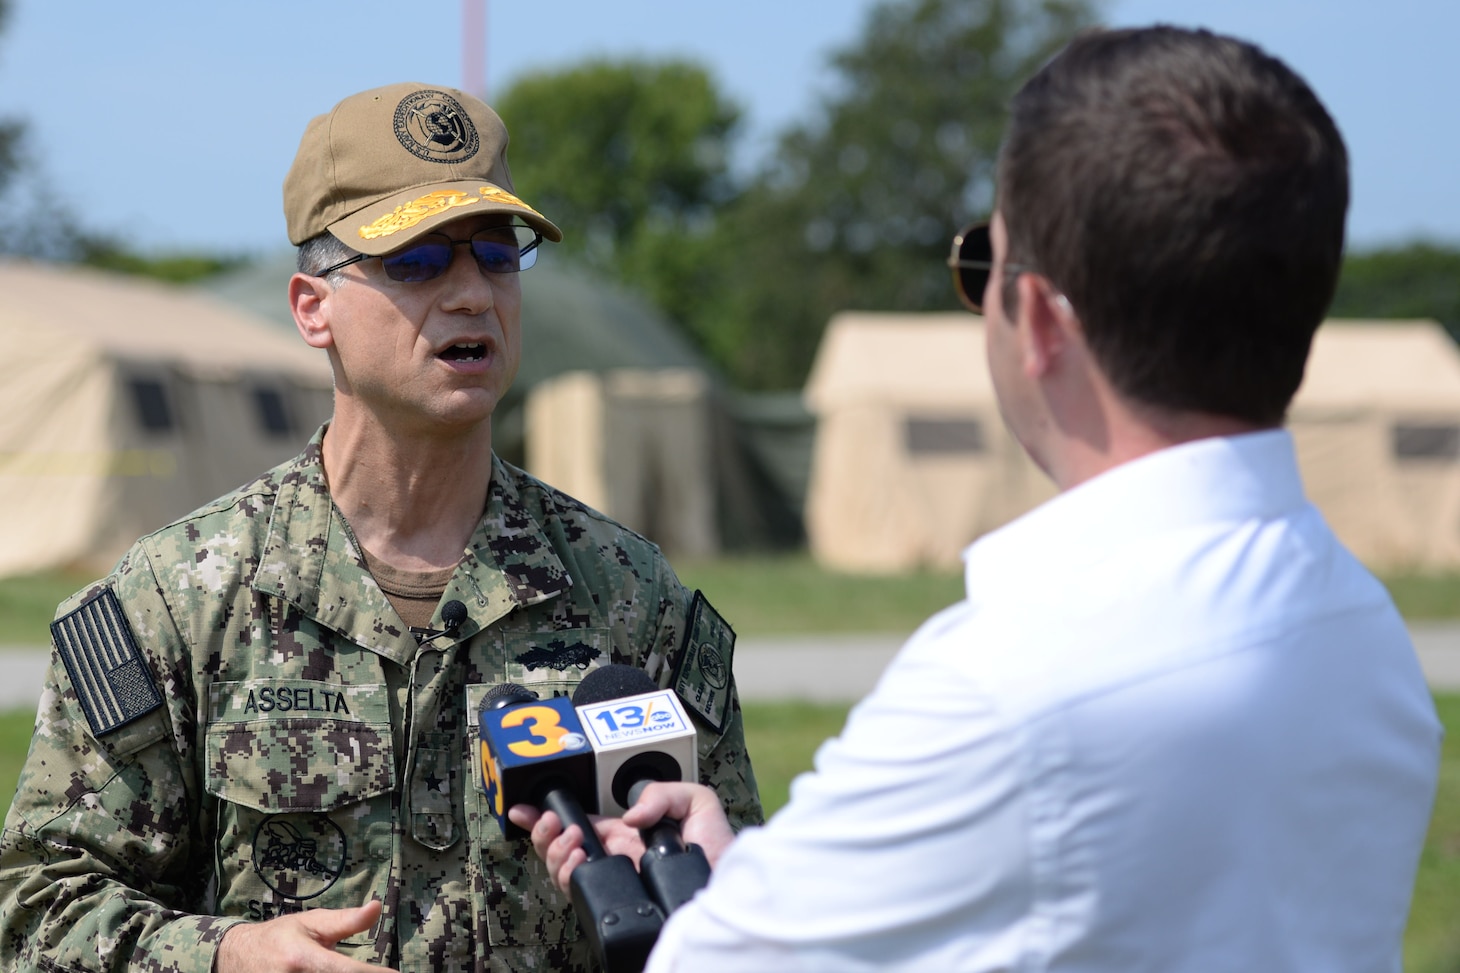 Virginia Beach Va. (Aug. 12, 2021) Local media visits Navy Expeditionary Combat Command (NECC) on Joint Expeditionary Base Little Creek - Fort Story during a media event for Large Scale Exercise (LSE 2021). LSE 2021 demonstrates the Navy's ability to employ precise, lethal, and overwhelming force globally across three naval component commands, five numbered fleets, and 17 time zones. LSE 2021 merges live and synthetic training capabilities to create an intense, robust training environment. It will connect high-fidelity training and real-work operations, to build knowledge and skills needed in today's complex, multi-domain, and contested environment. U.S. Navy photo by Mass Communications Specialist 2nd Class Eugene Kretschmer.